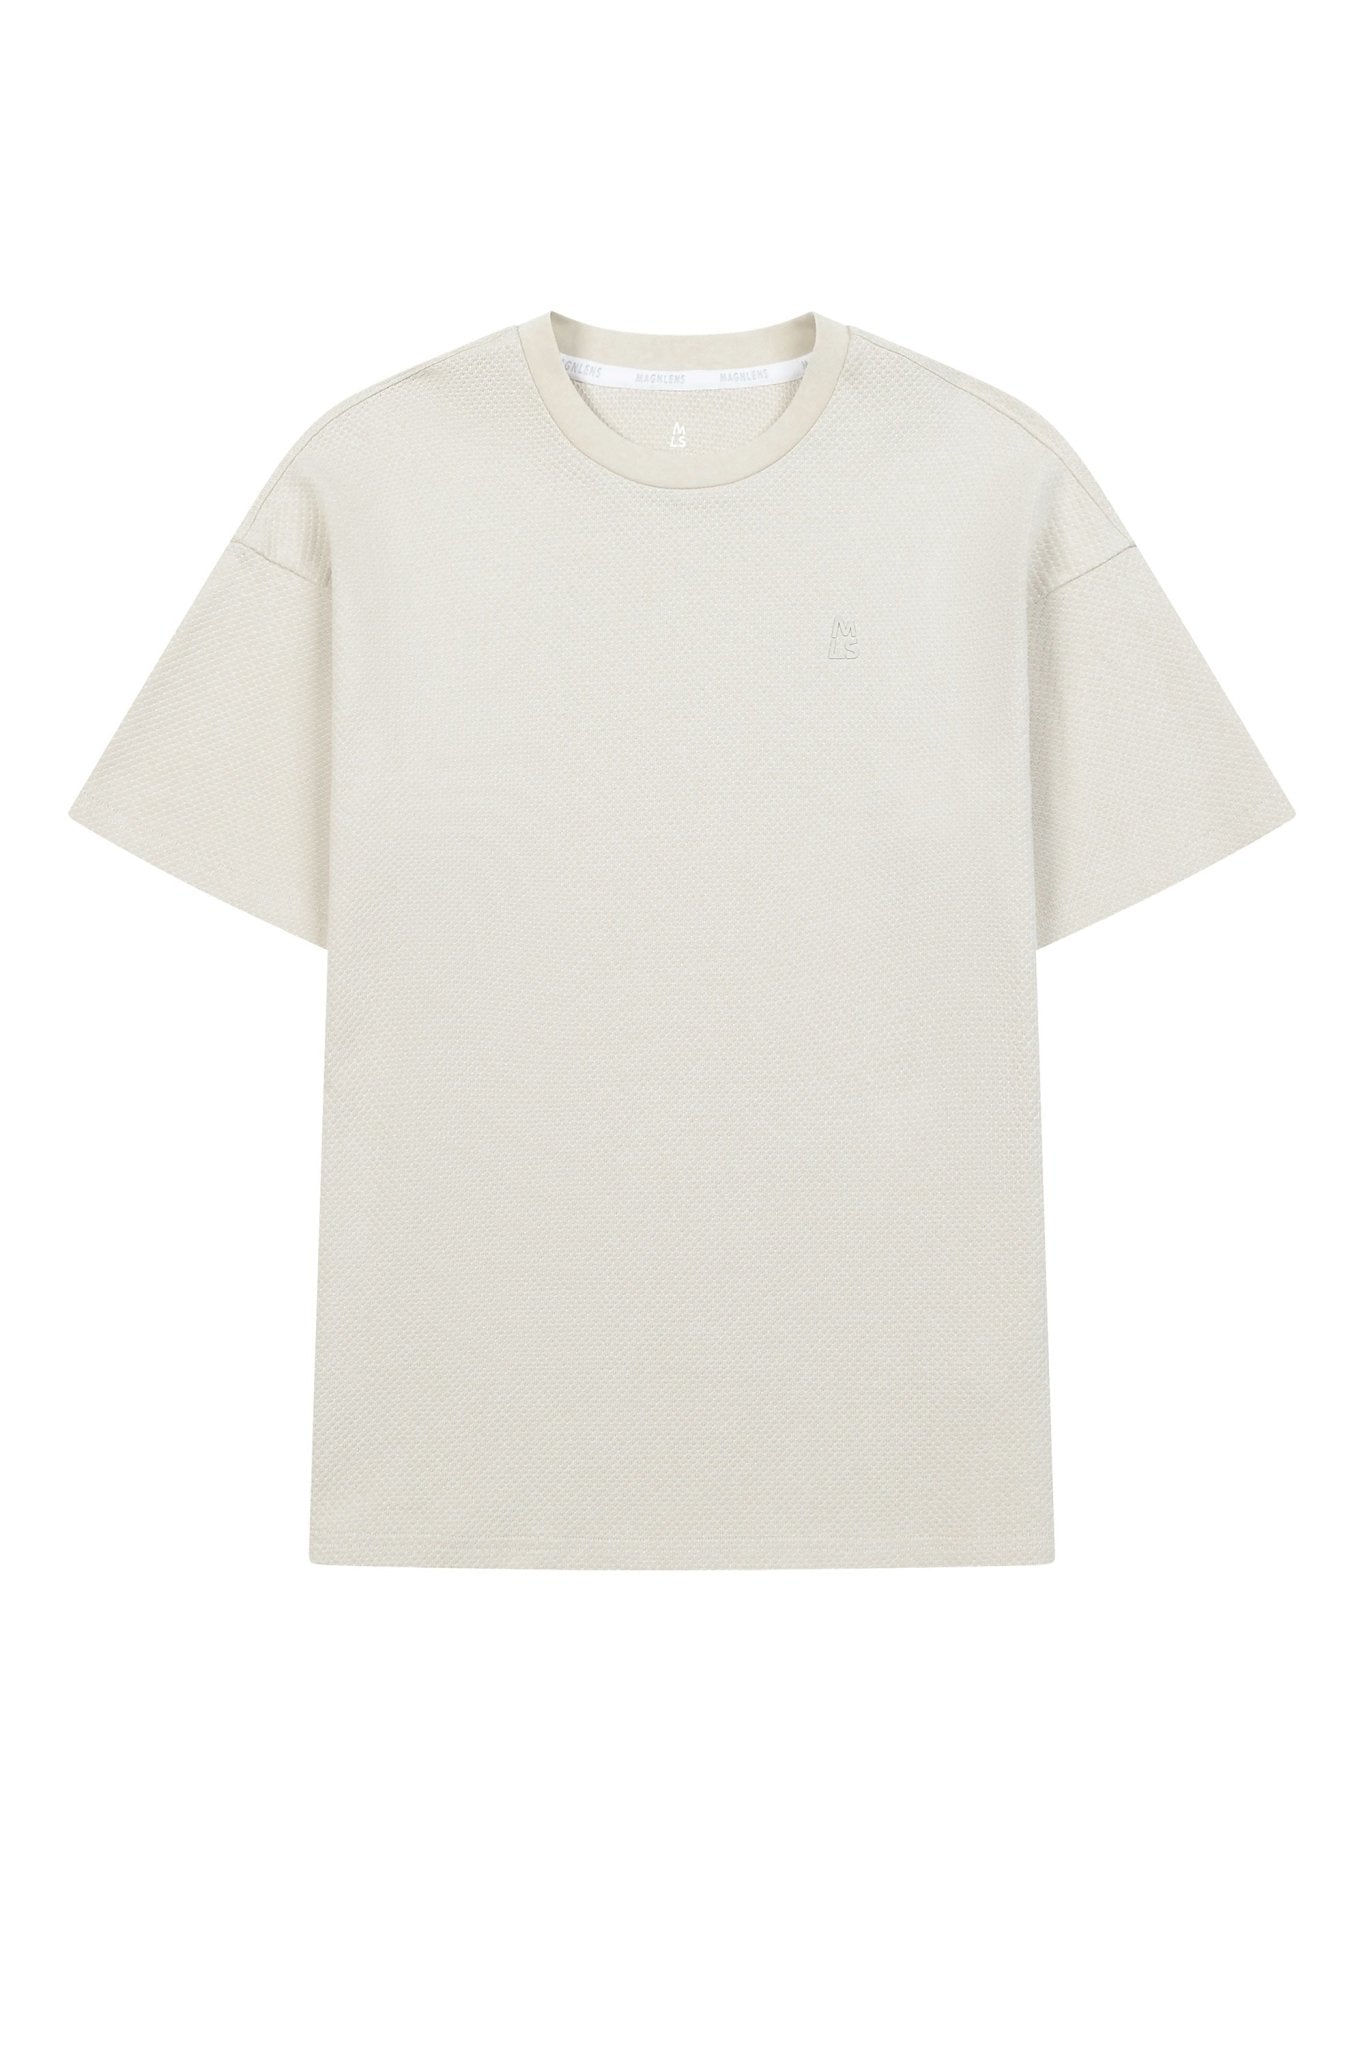 Jacquard Essential Boxy Tee - Magnlens